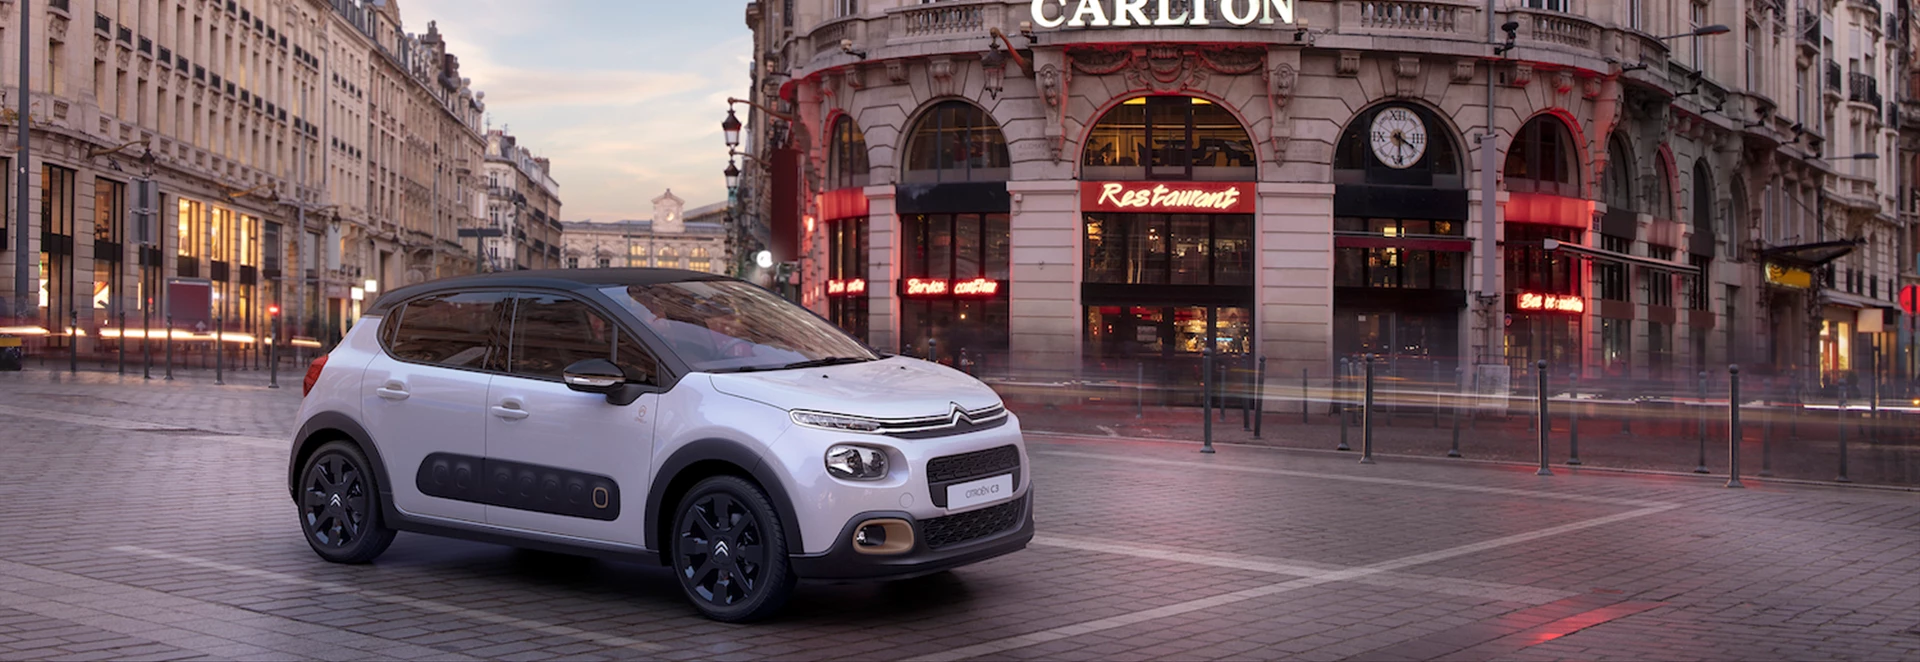 Citroen celebrates century anniversary with special editions